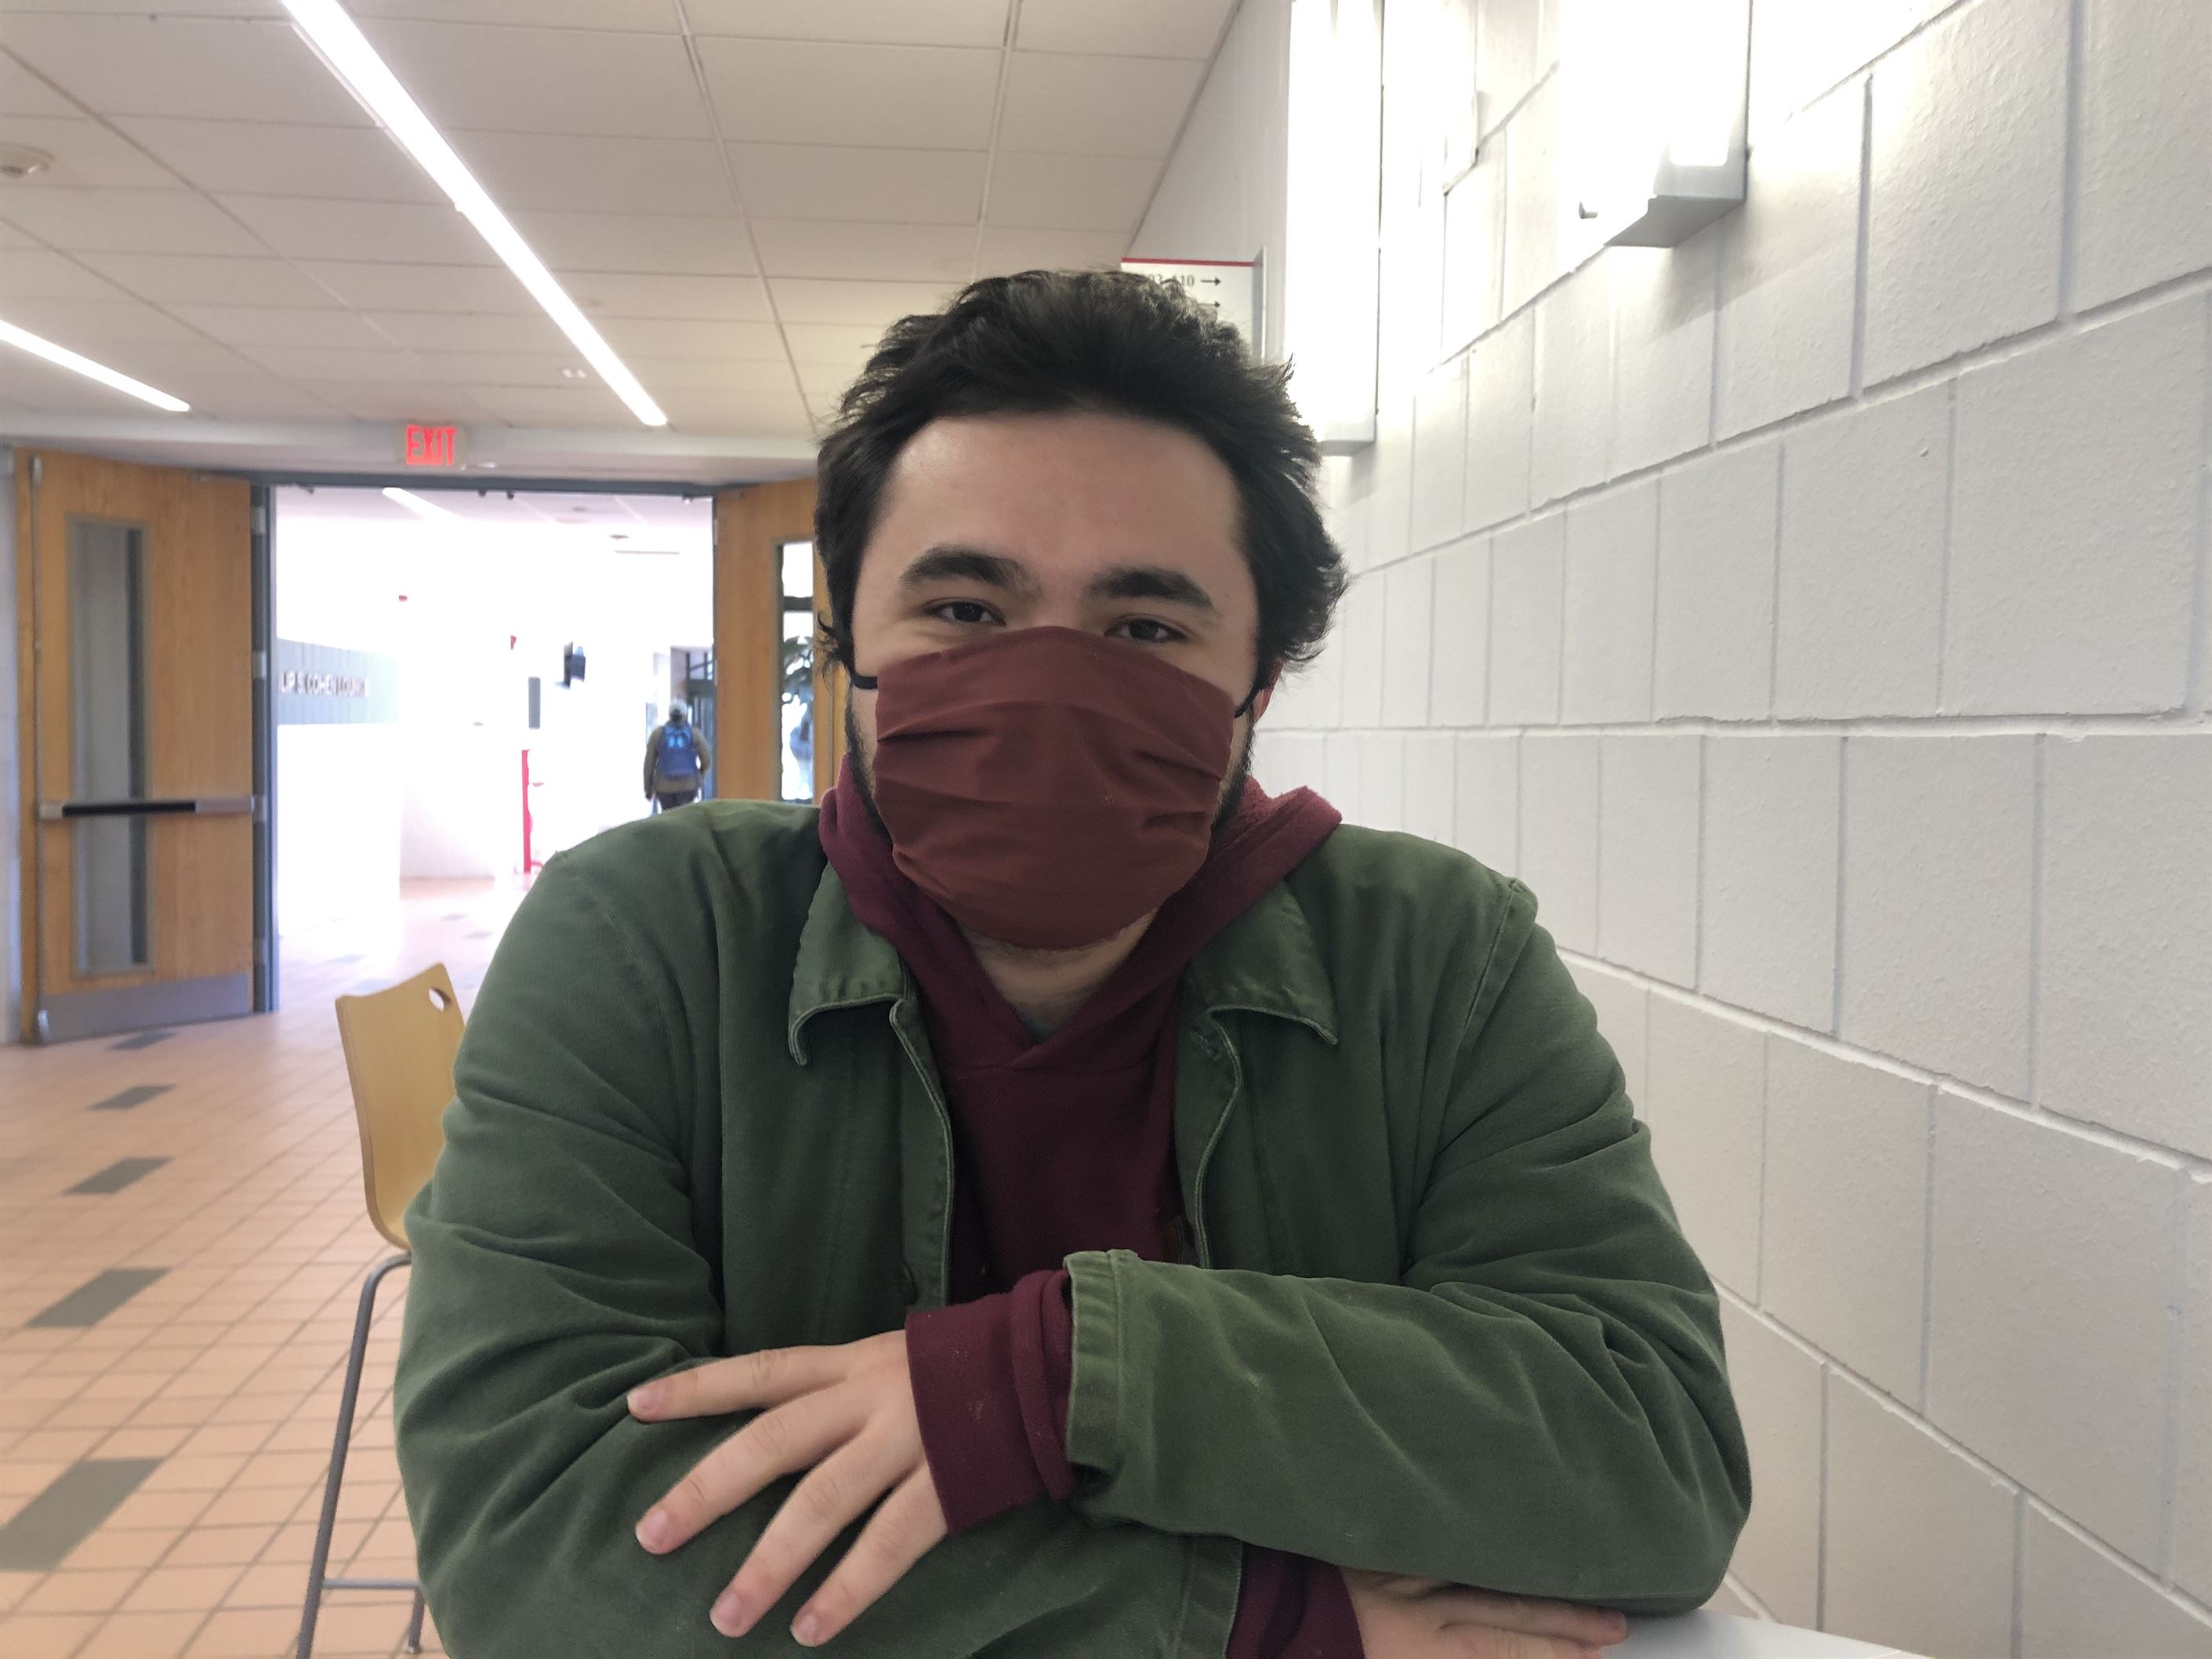 Nick Vecchione, a senior English major, supports the food drive but voiced concerns about Parking Services policies. Jenna Sundel | The Montclarion